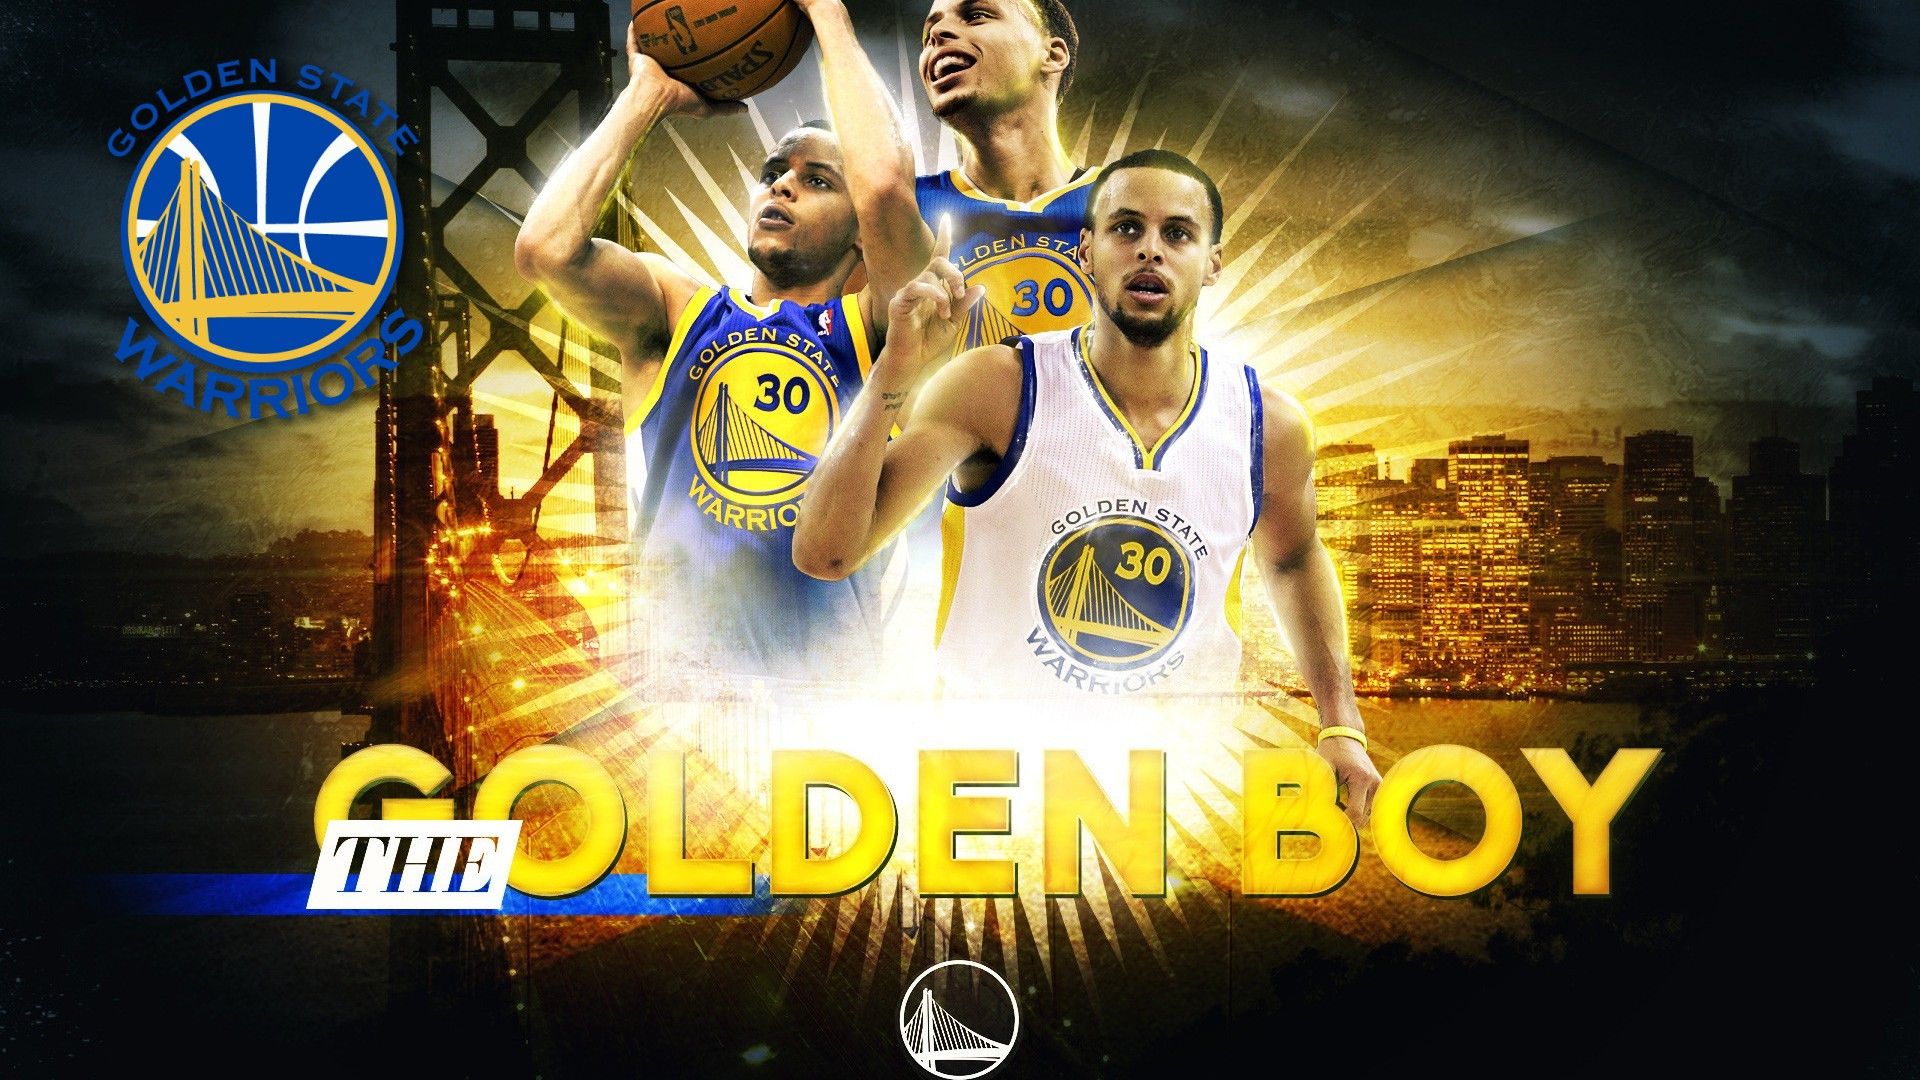 Stephen Curry Layup 2560×1600 Wallpaper  Basketball Wallpapers at